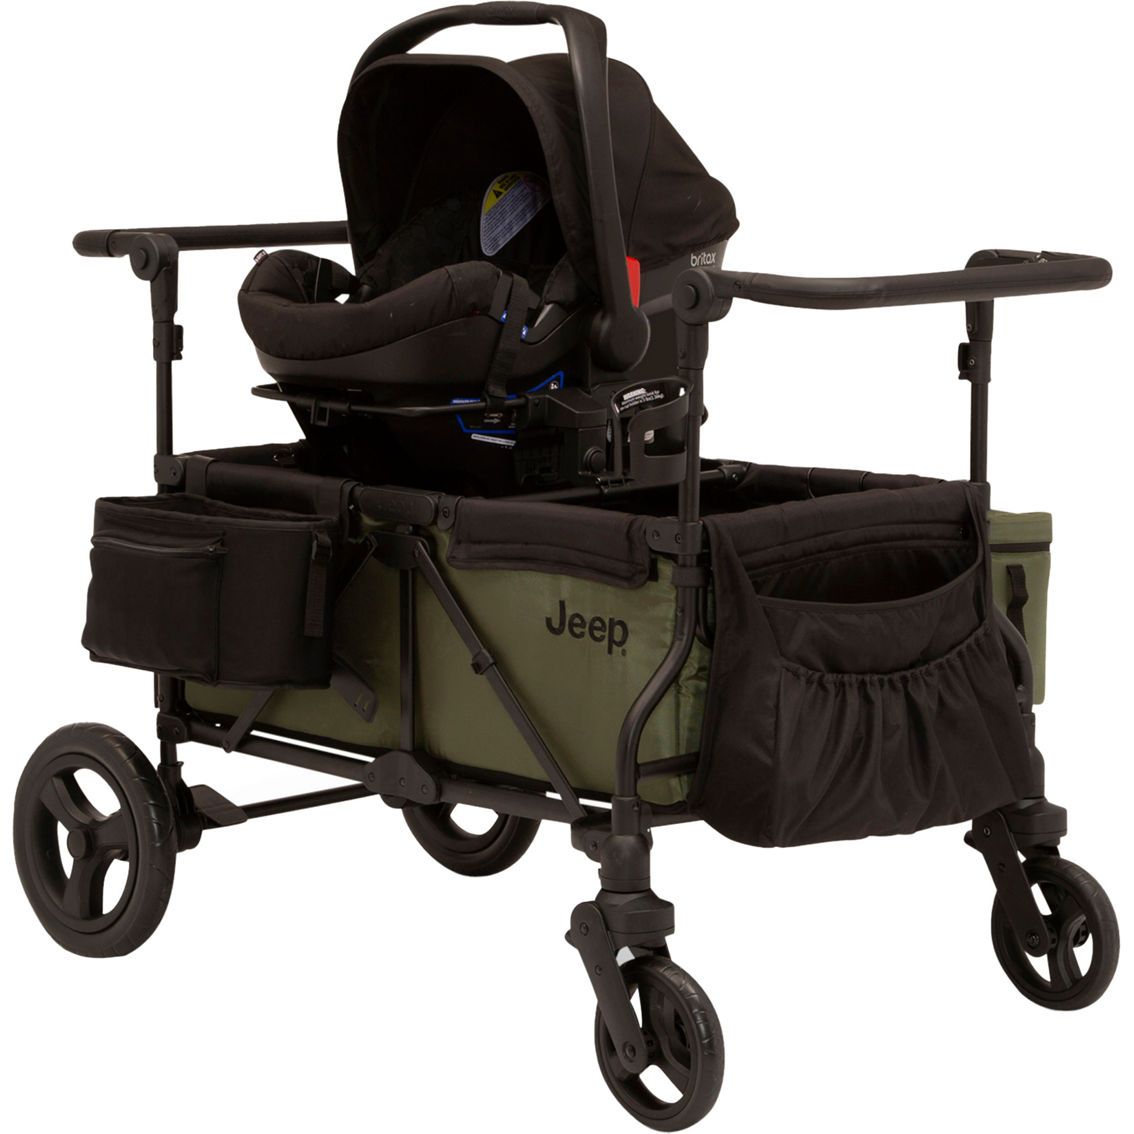 Jeep Deluxe Wrangler Wagon Stroller with Cooler Bag and Parent Organizer - Image 7 of 10